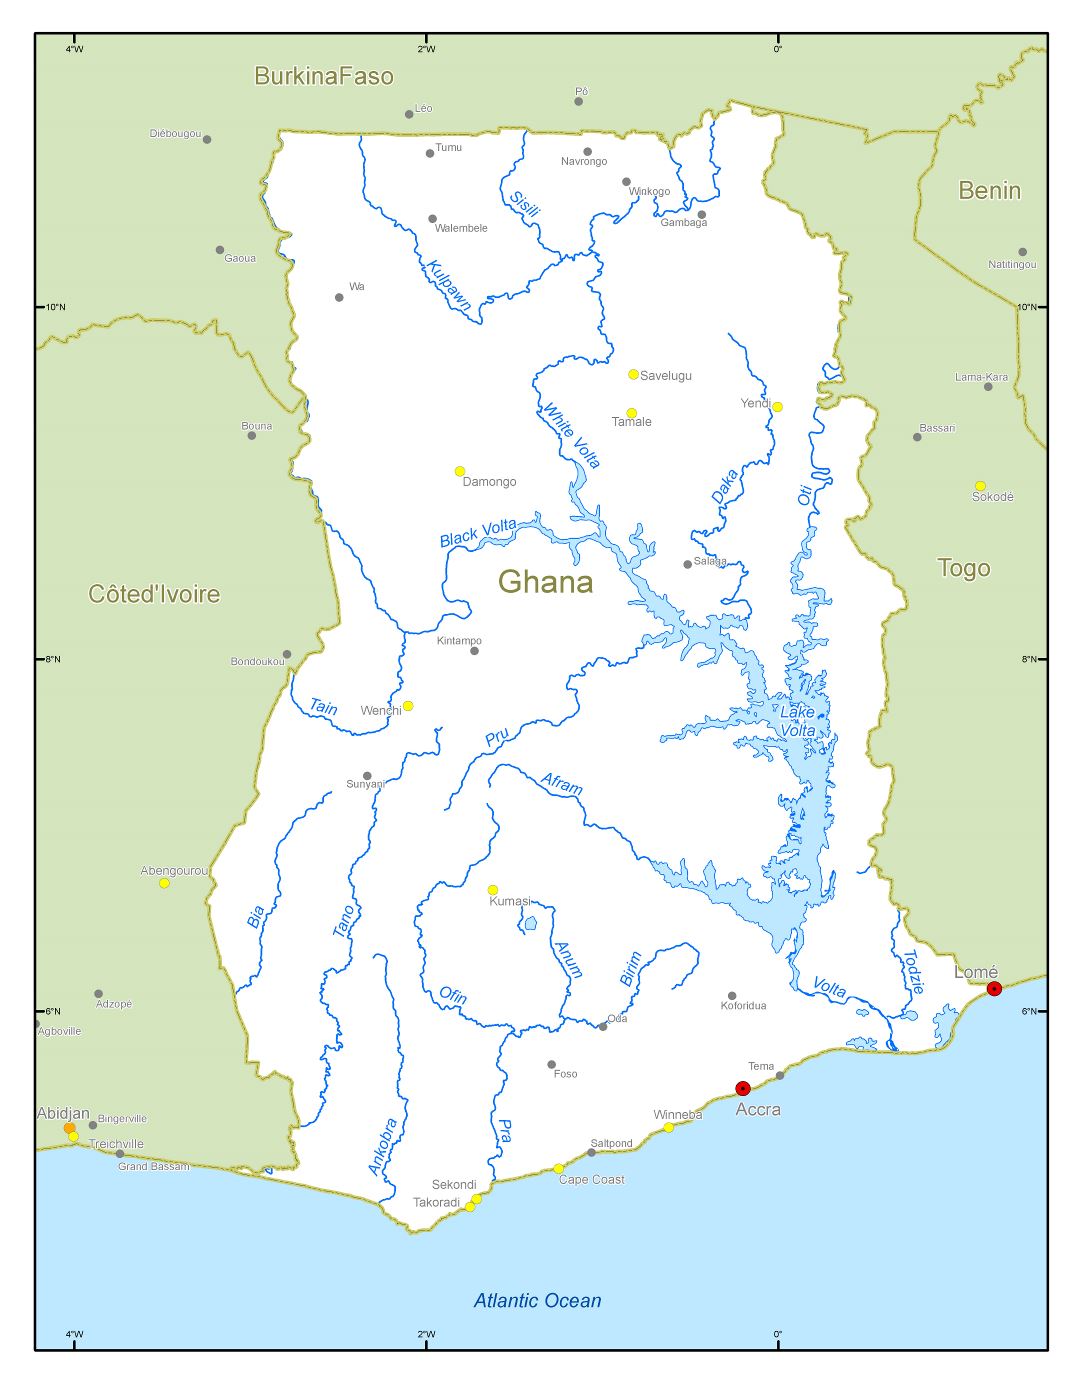 Large scale rivers and lakes map of Ghana